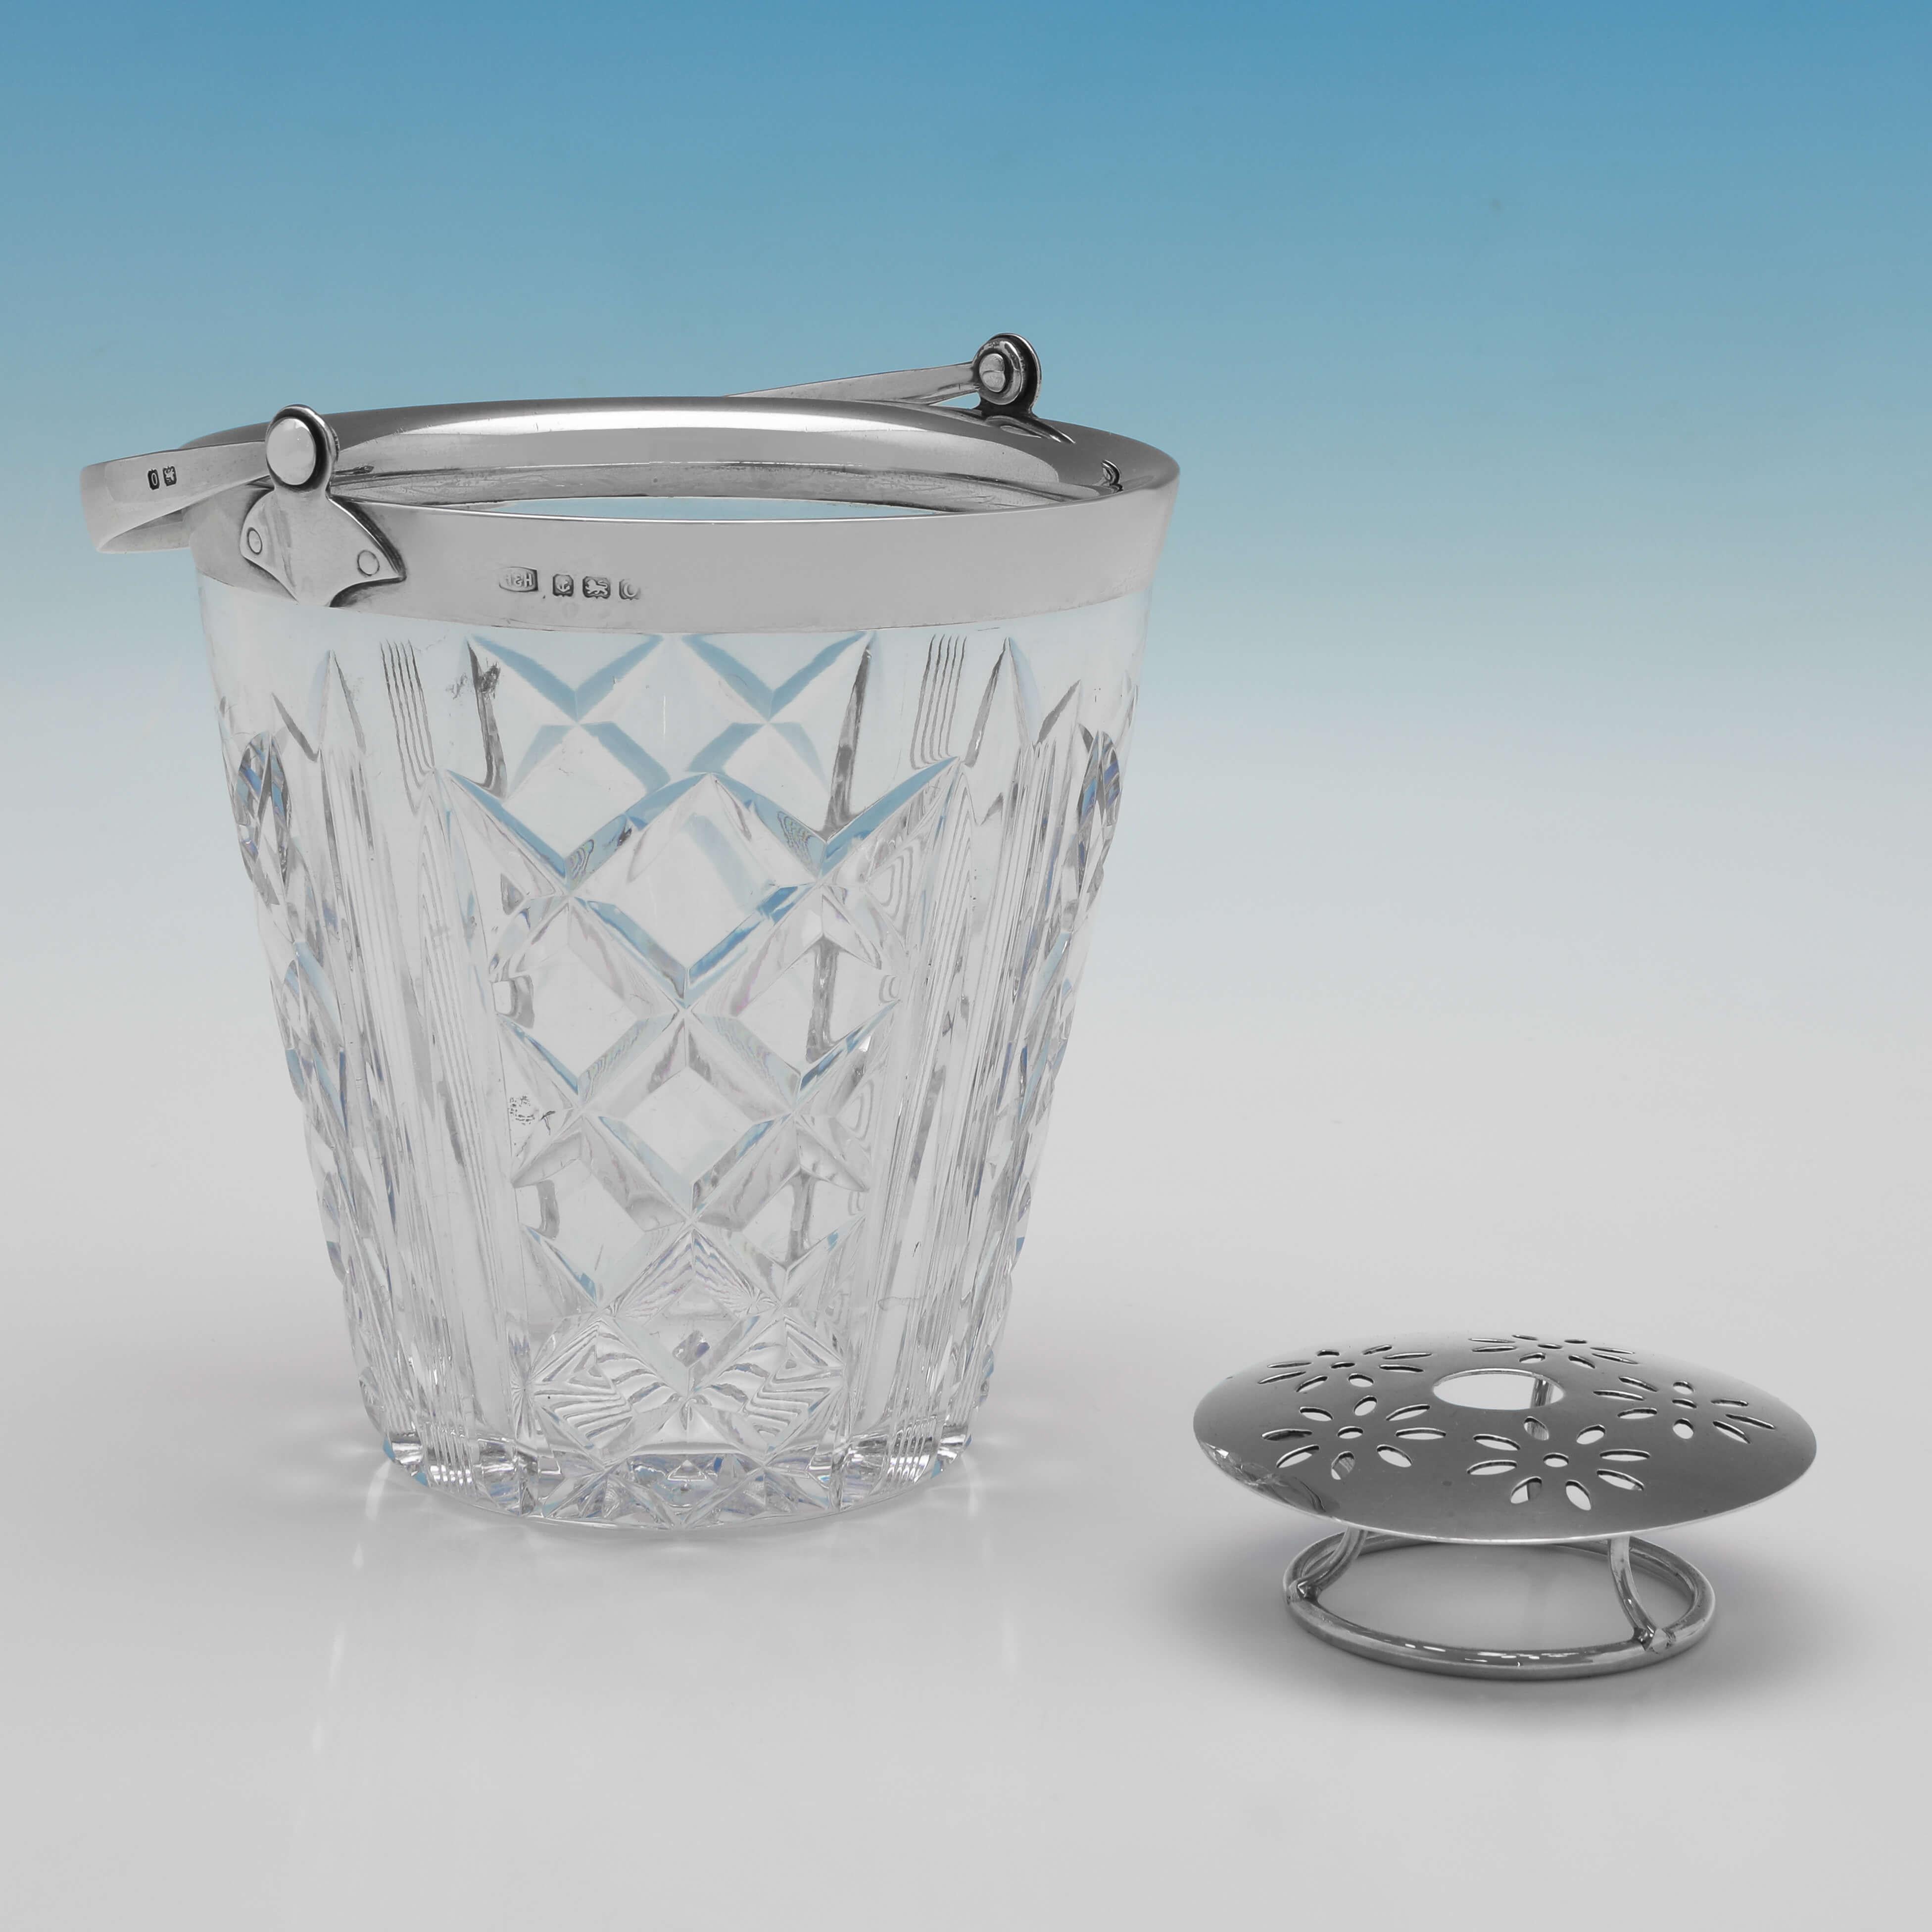 English Art Deco Period Glass & Sterling Silver Ice Bucket with Strainer, London, 1938